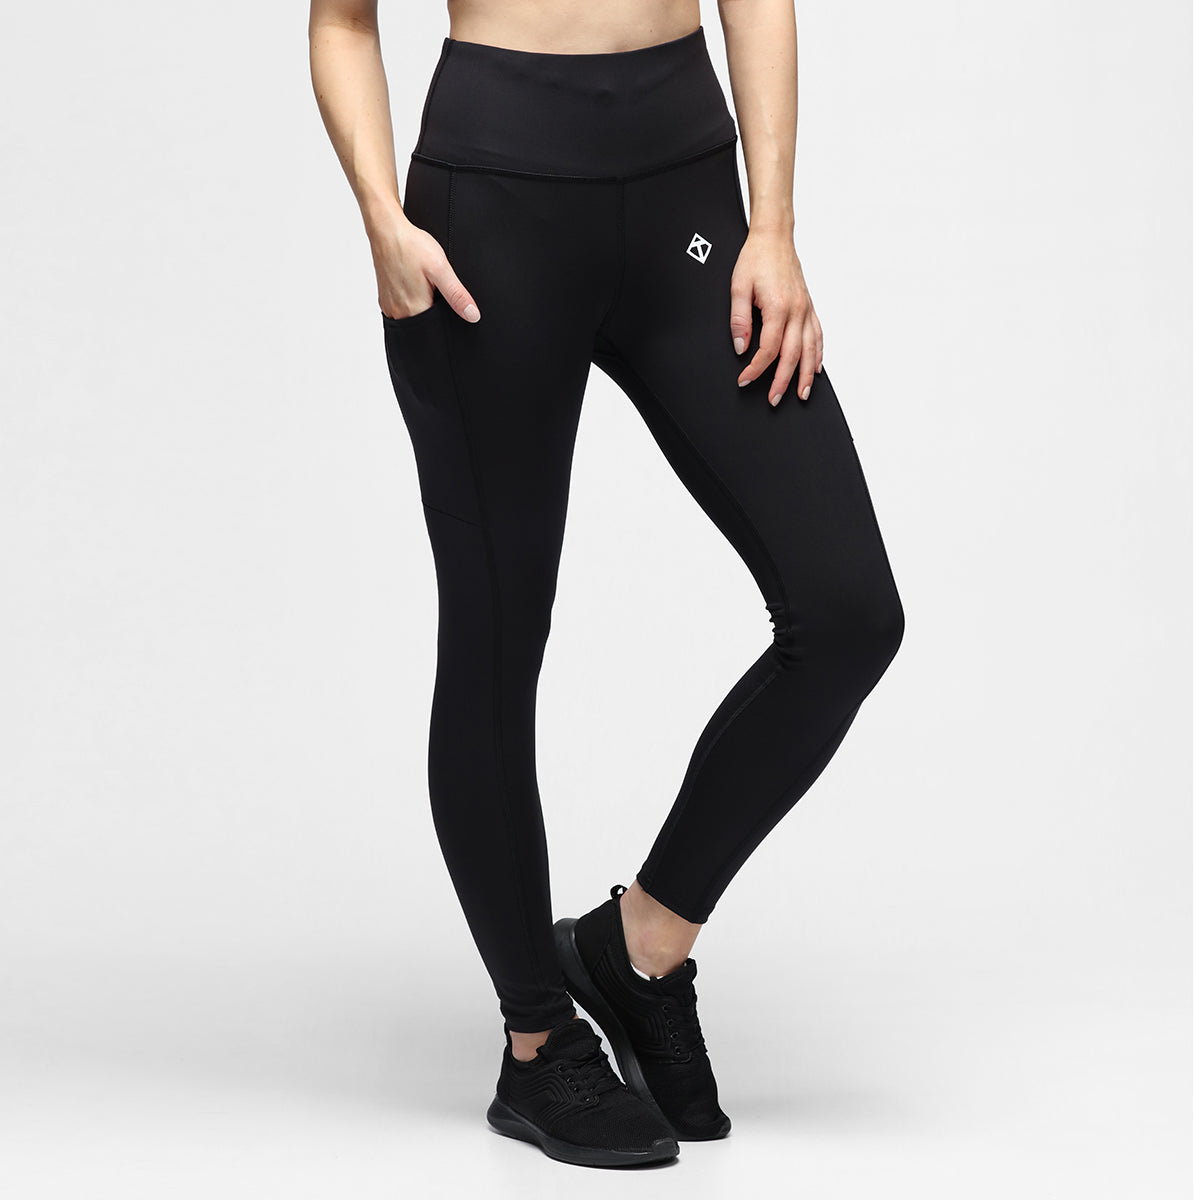 The Heathyoga Bootcut Yoga Pants Are on Sale at Amazon for Just 20